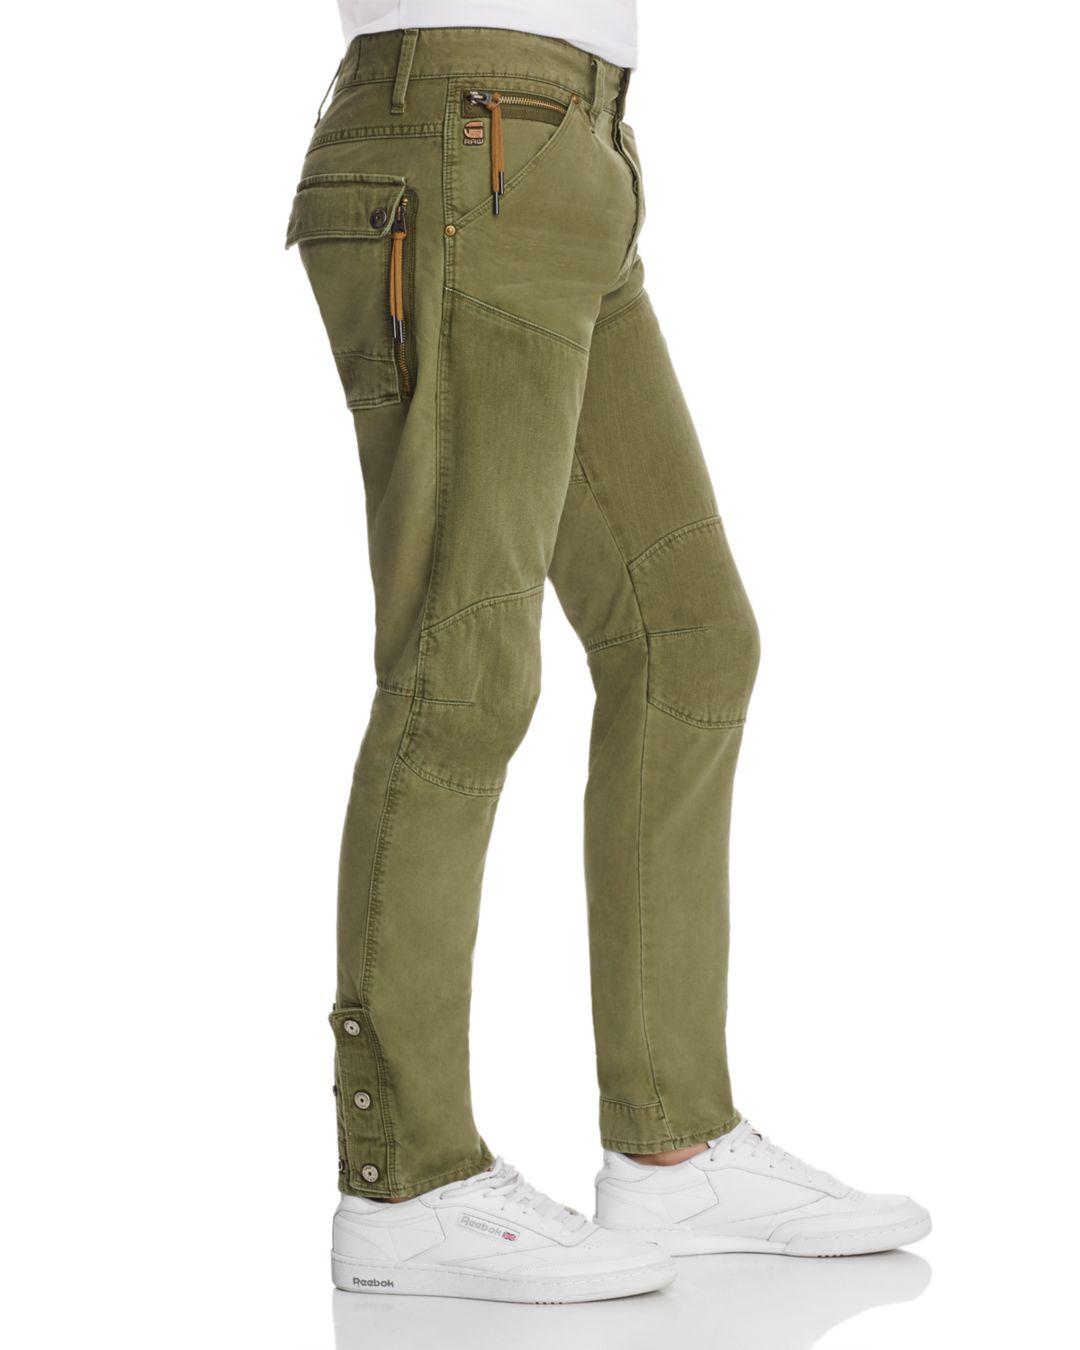 G-Star RAW Denim G - Star Raw 5620 3d Strike Straight Fit Jeans In Sage in  Green for Men - Lyst